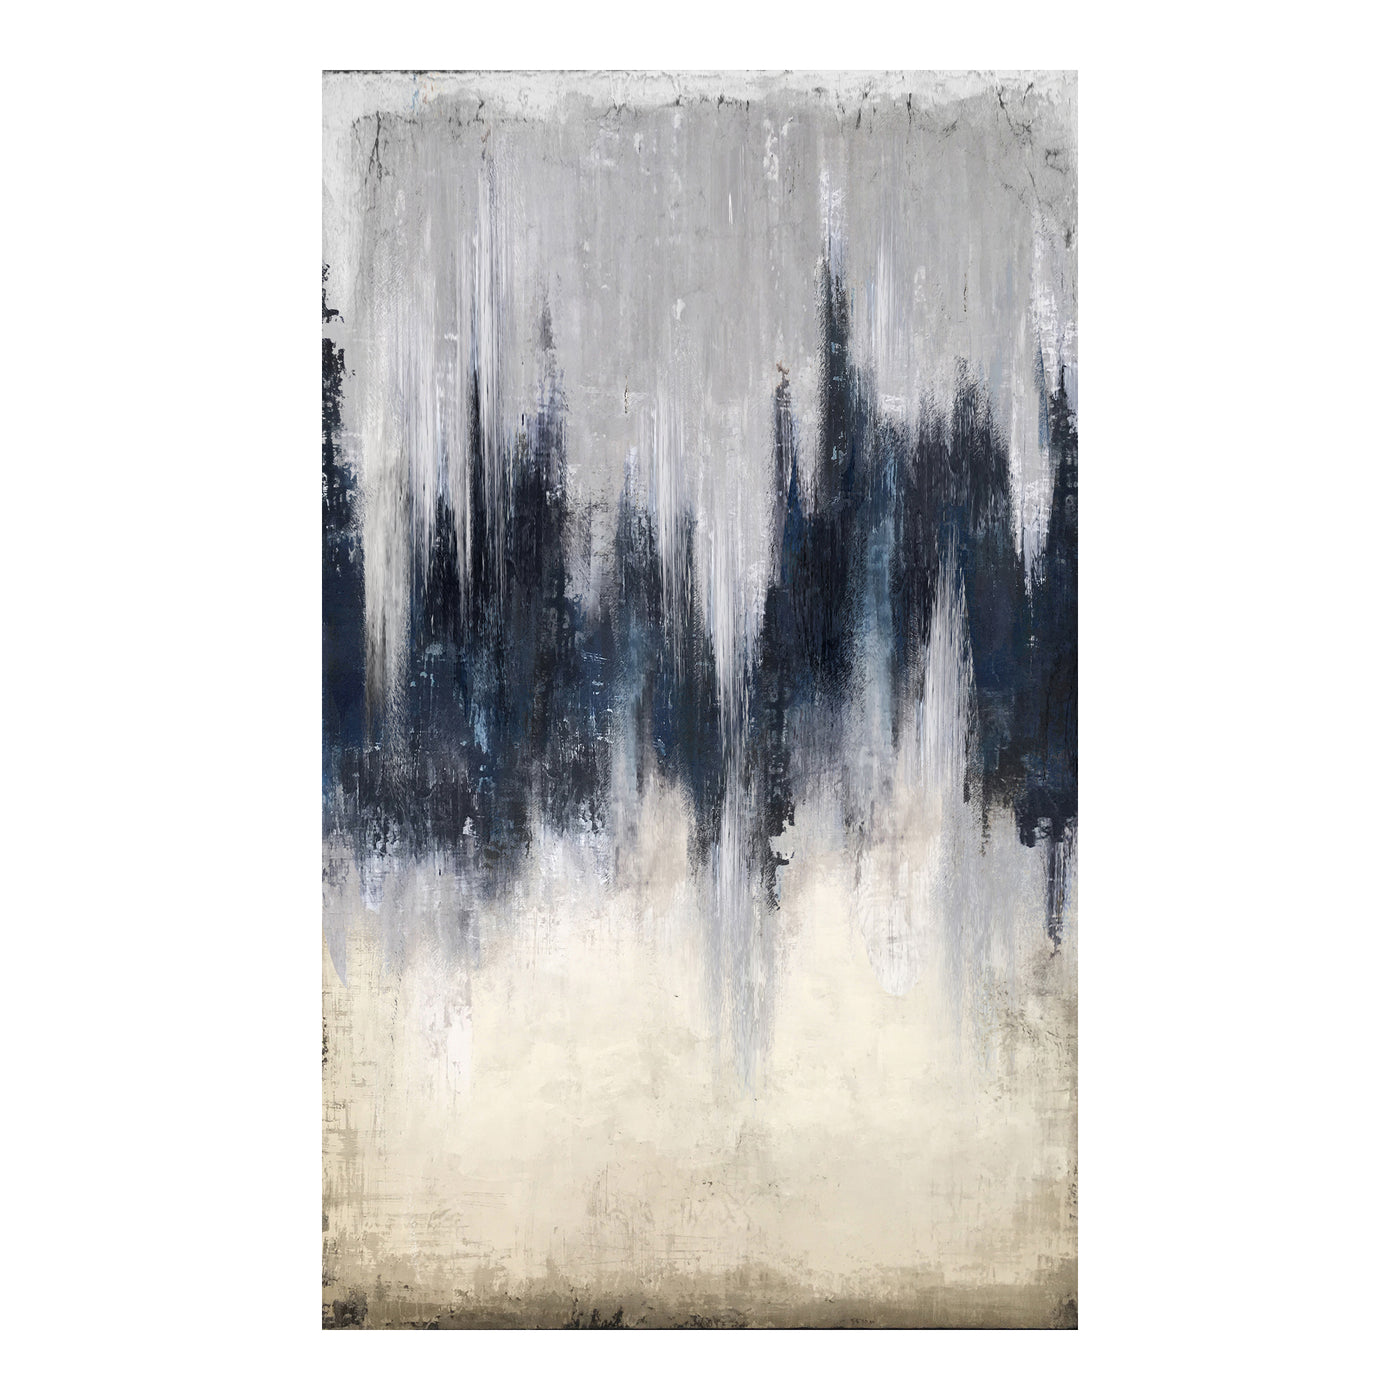 This extra-large painting will be the stunning focal point in any room it finds home. Tones from white to black in dramati...